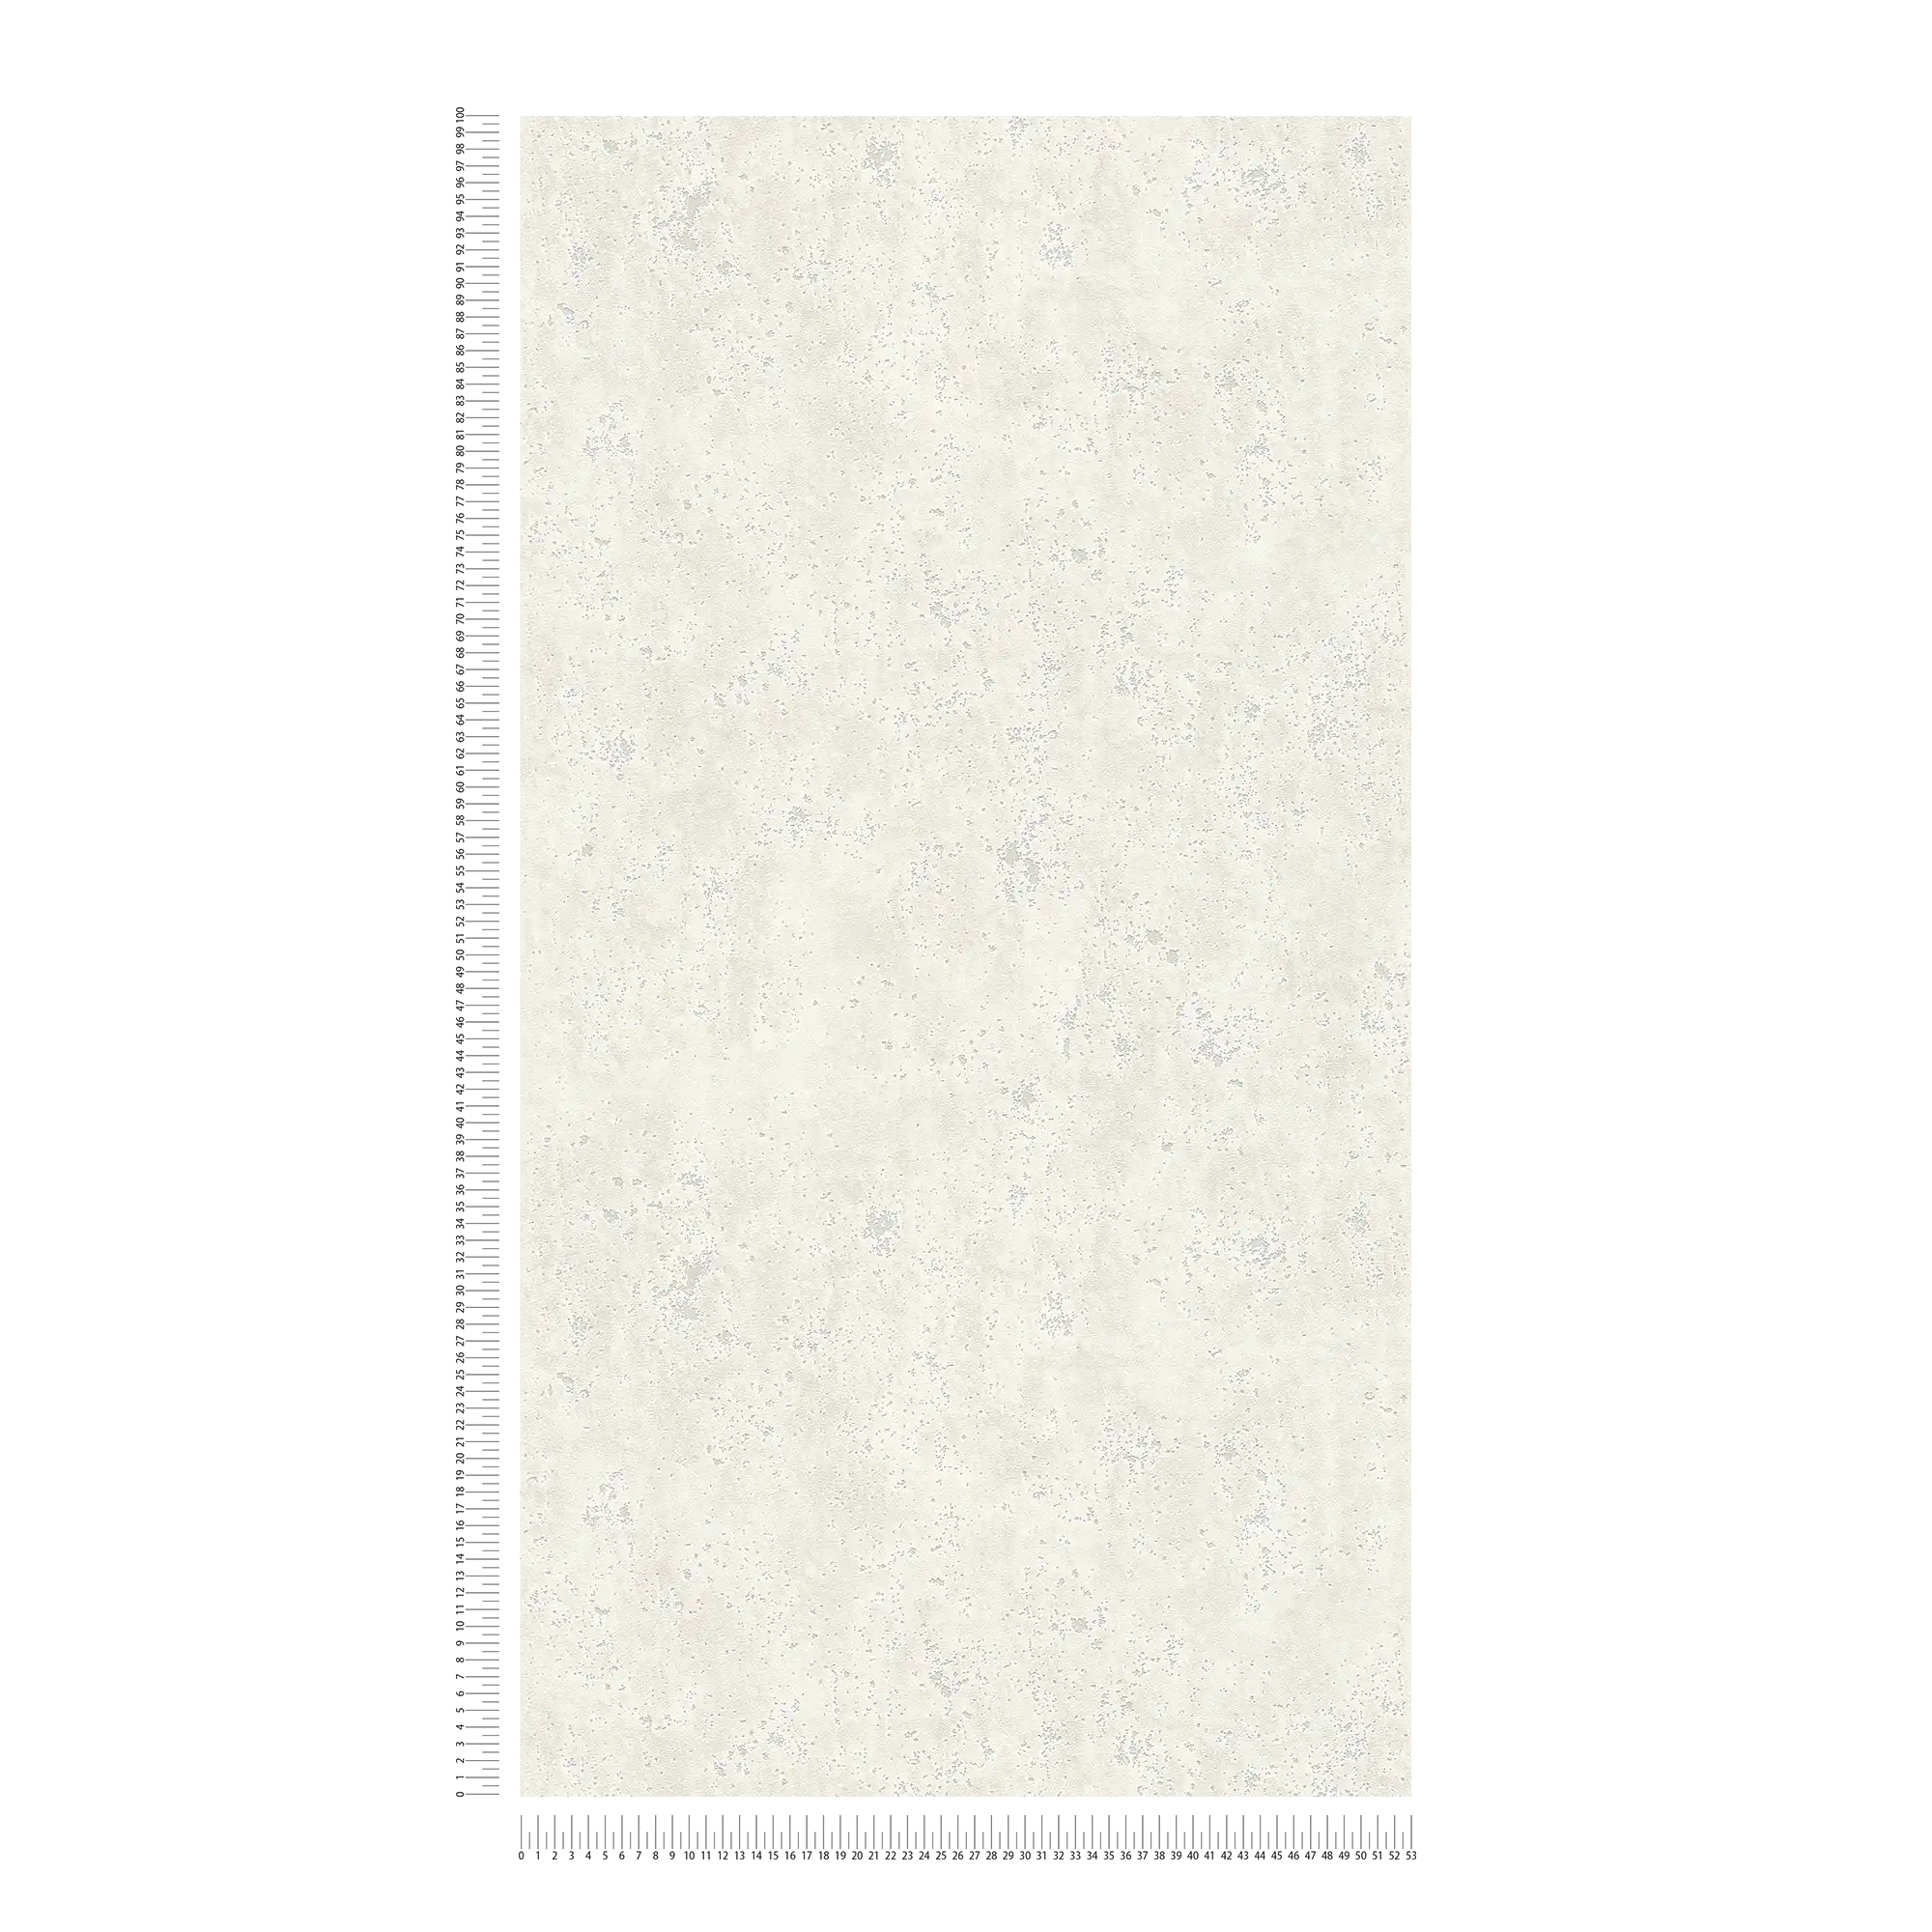             Wallpaper with plaster look & surface texture - cream
        